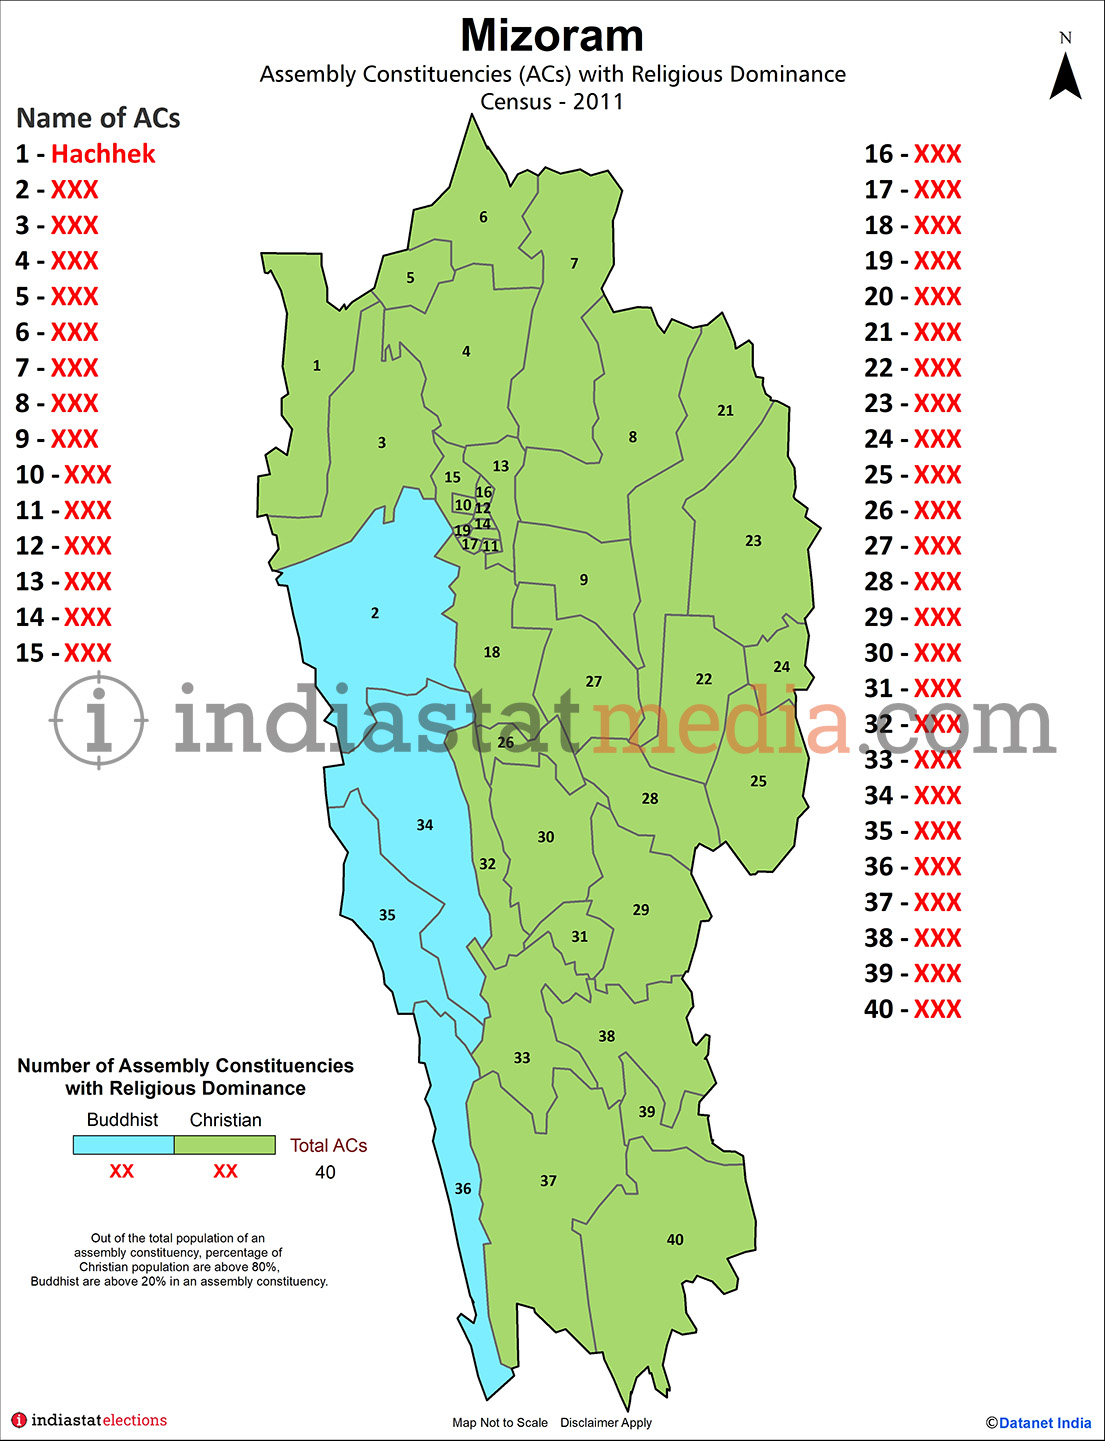 Assembly Constituencies (ACs) with Religious Dominance in Mizoram - Census 2011